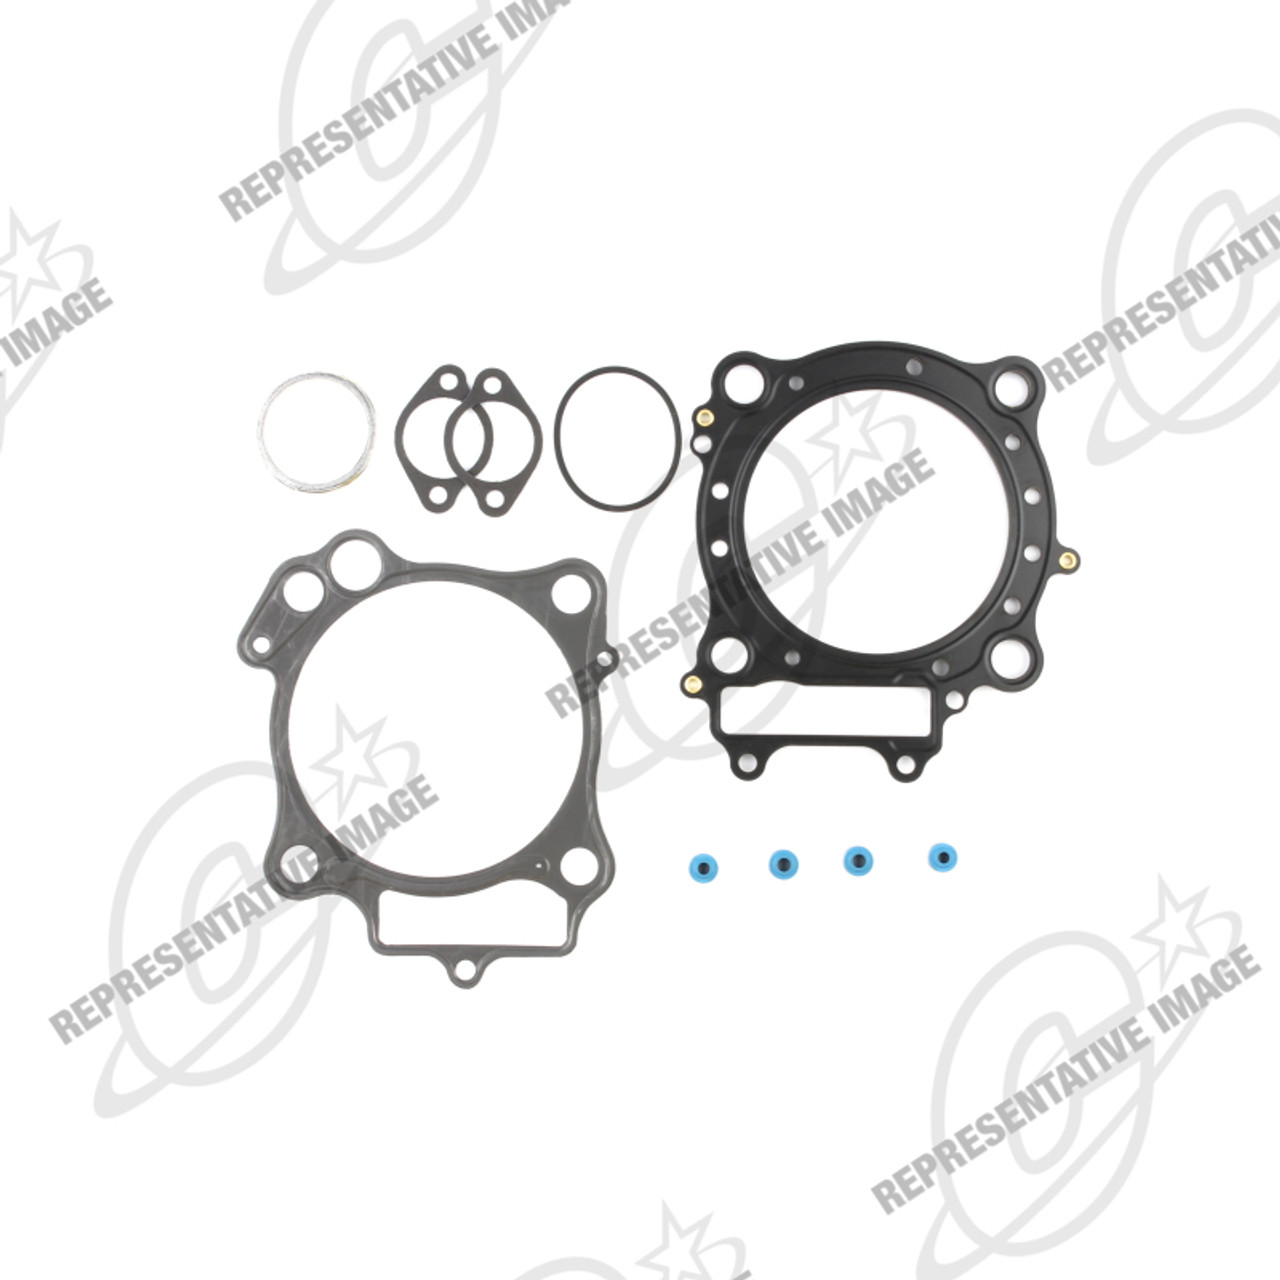 Cometic 07-16 Harley-Davidson 3.937in Bore .045 Head Gasket Complete Gasket Kit - C10044-045 Photo - Primary